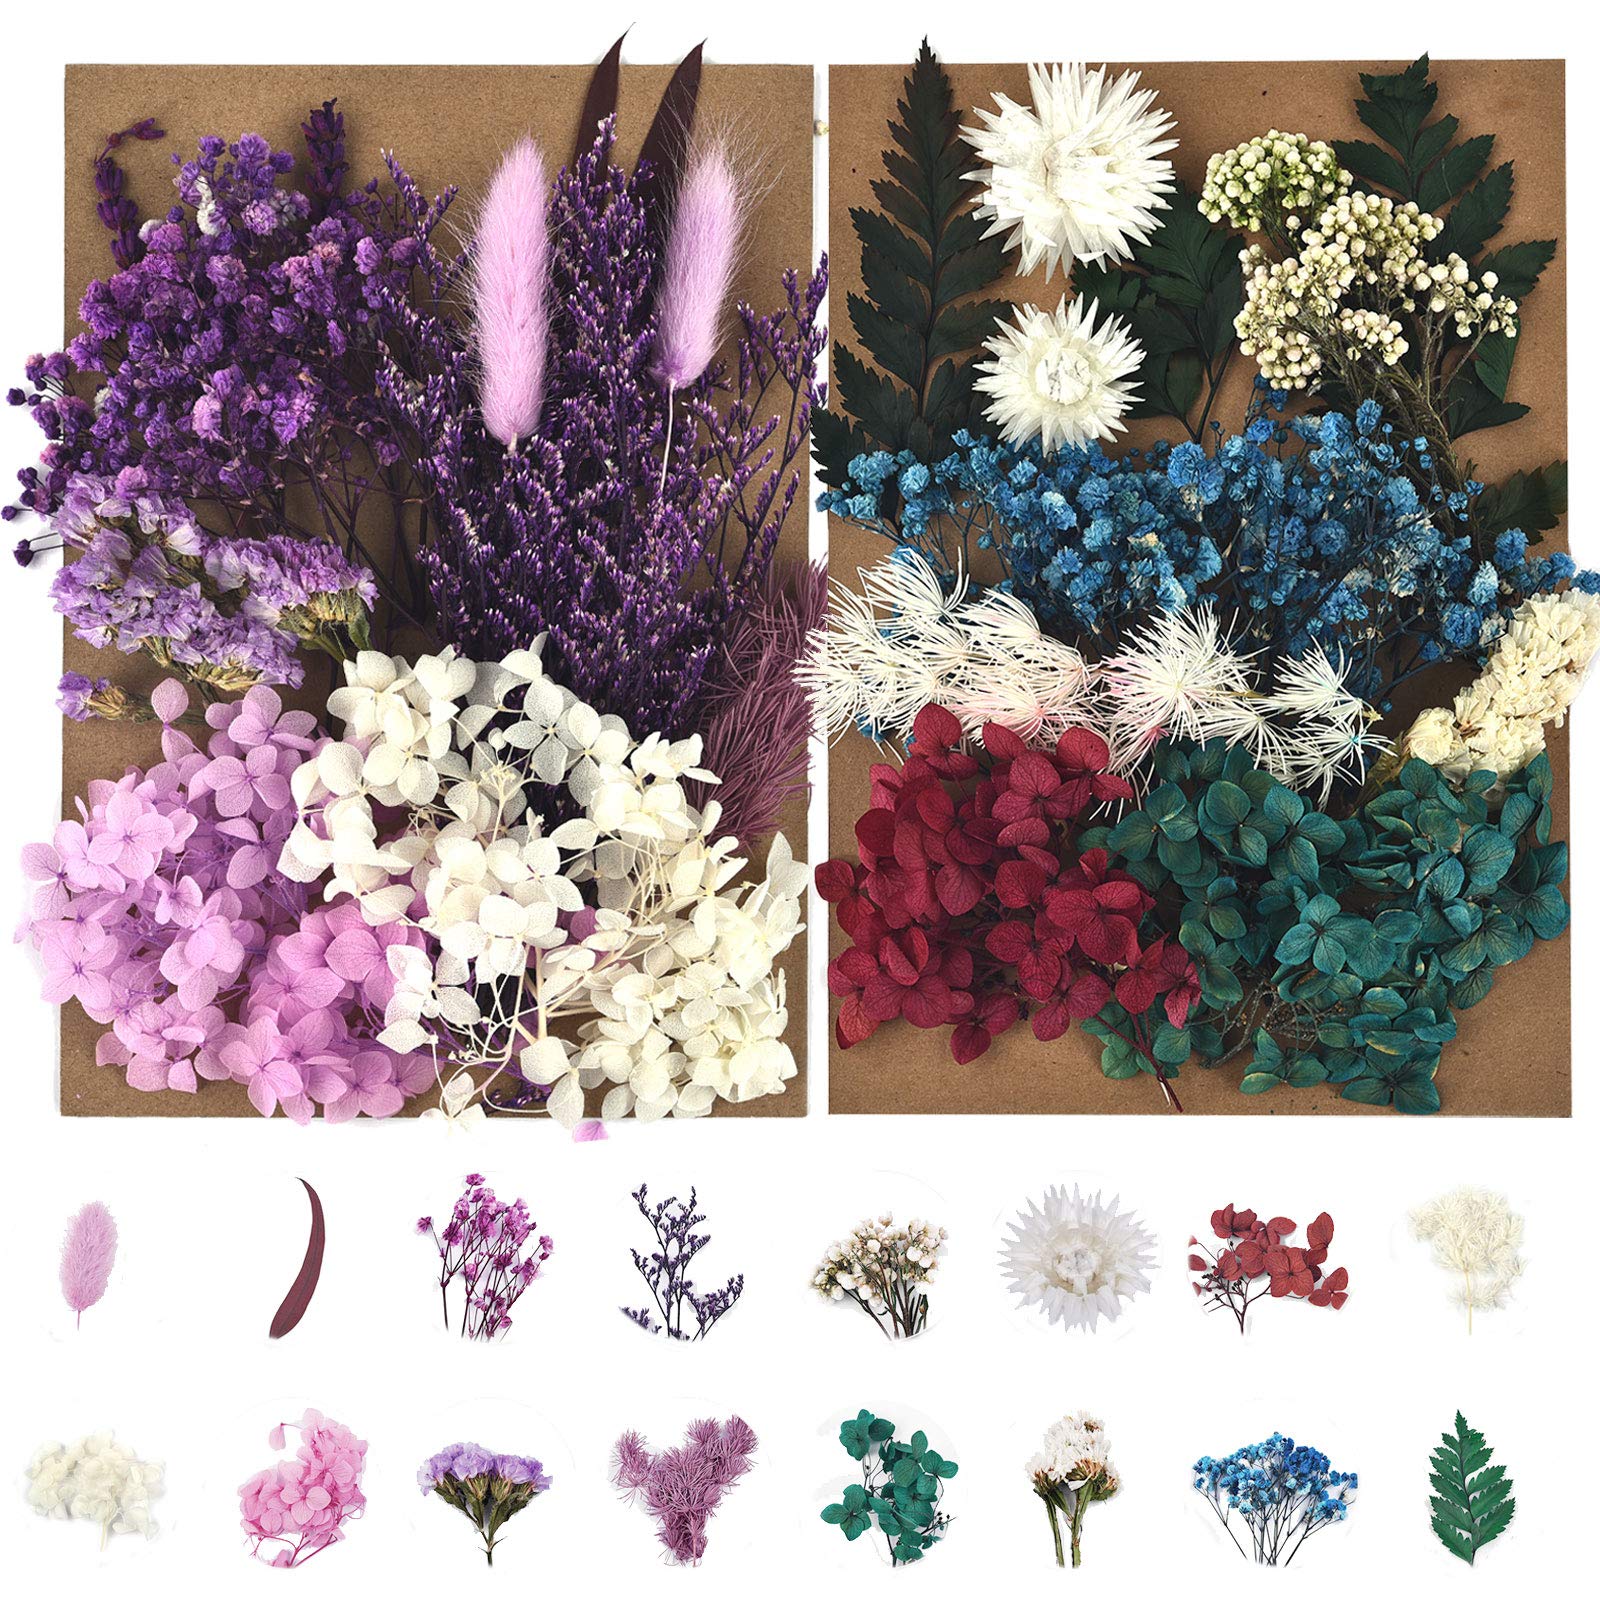 DALARAN 3 Pack Dried Pressed Flowers for Resin and Candle Making Multiple  Natural Pressed Flowers Colorful Decorative Dried Flow